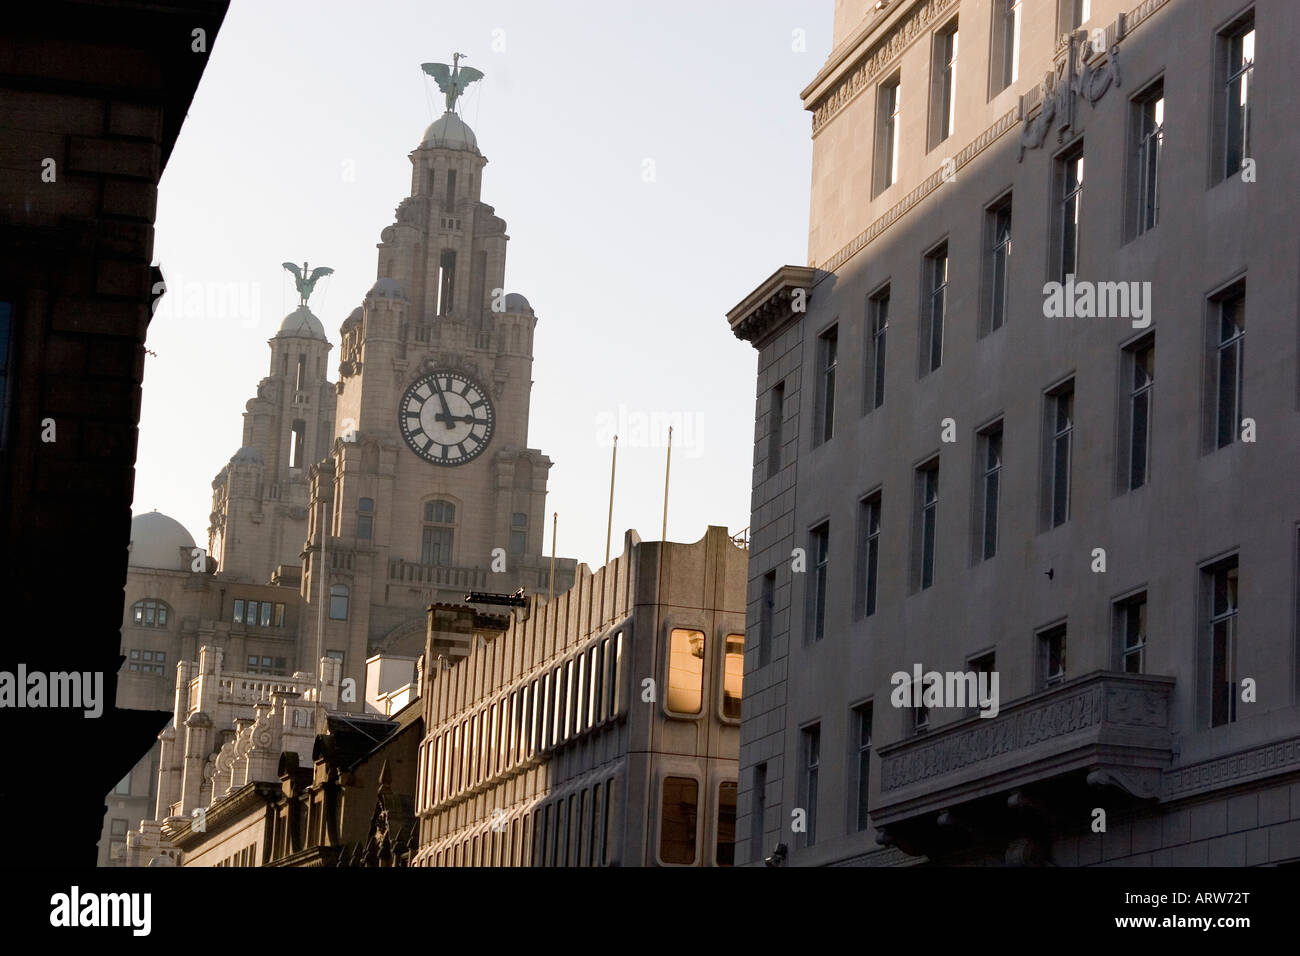 Liverpool home of The Beatles THE FAMOUS LIVER BUILDING ON THE MERSEY RIVER HARBOUR FRONT LIVERPOOL ENGLAND Stock Photo